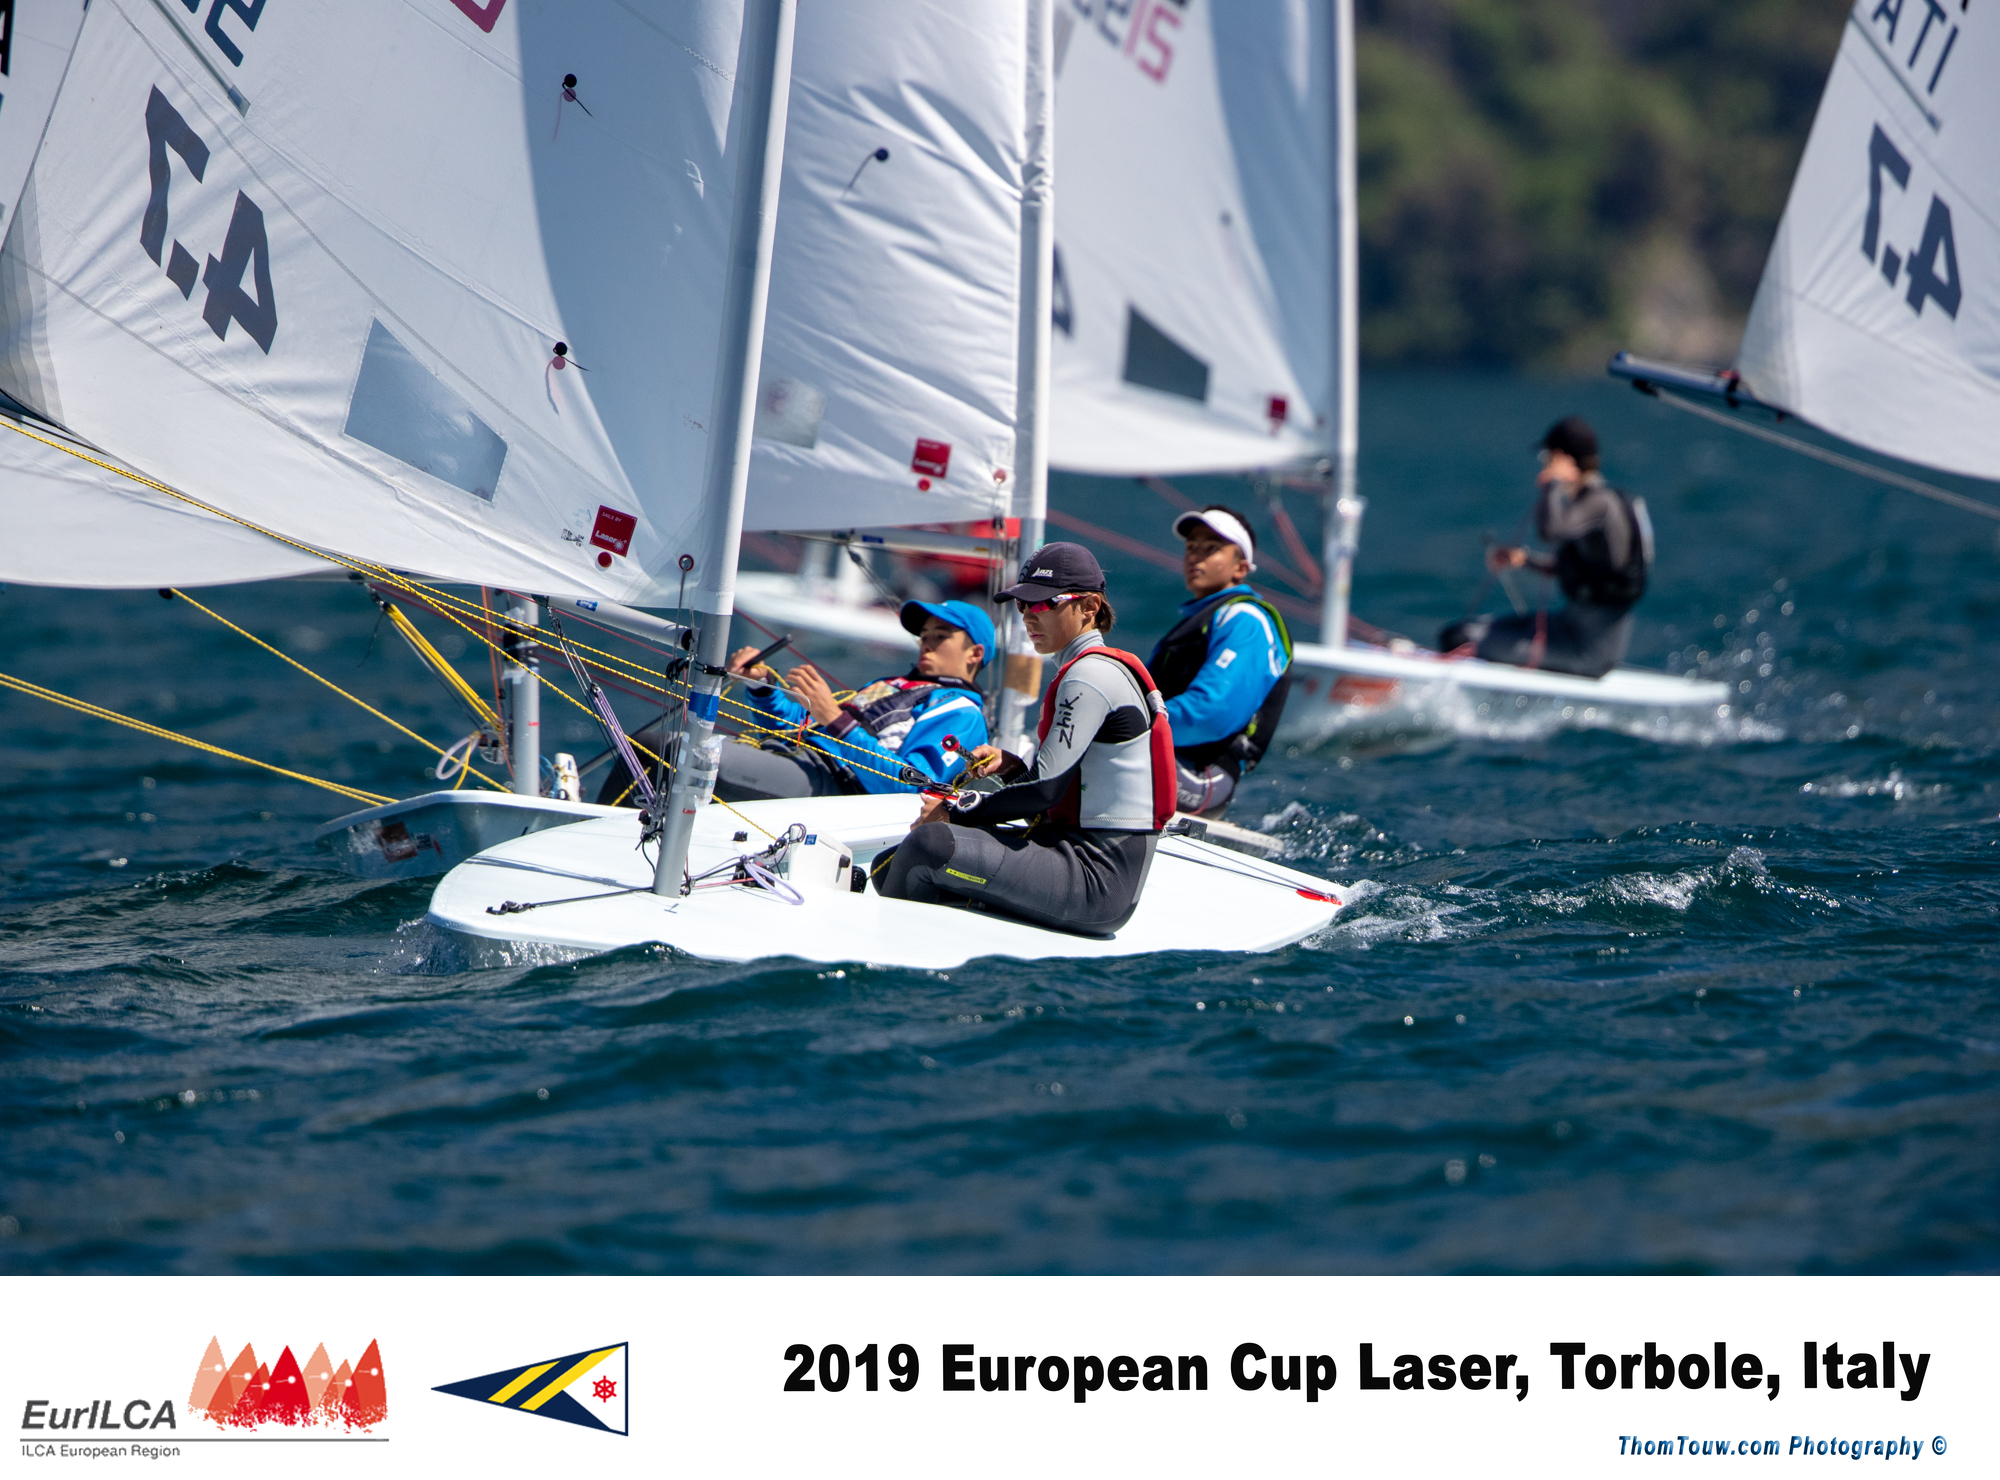  Laser  Europacup 2019  Act 4  Torbole ITA  Day 1, top conditions on Lake Garda for the 330 Lasers from 5 continents